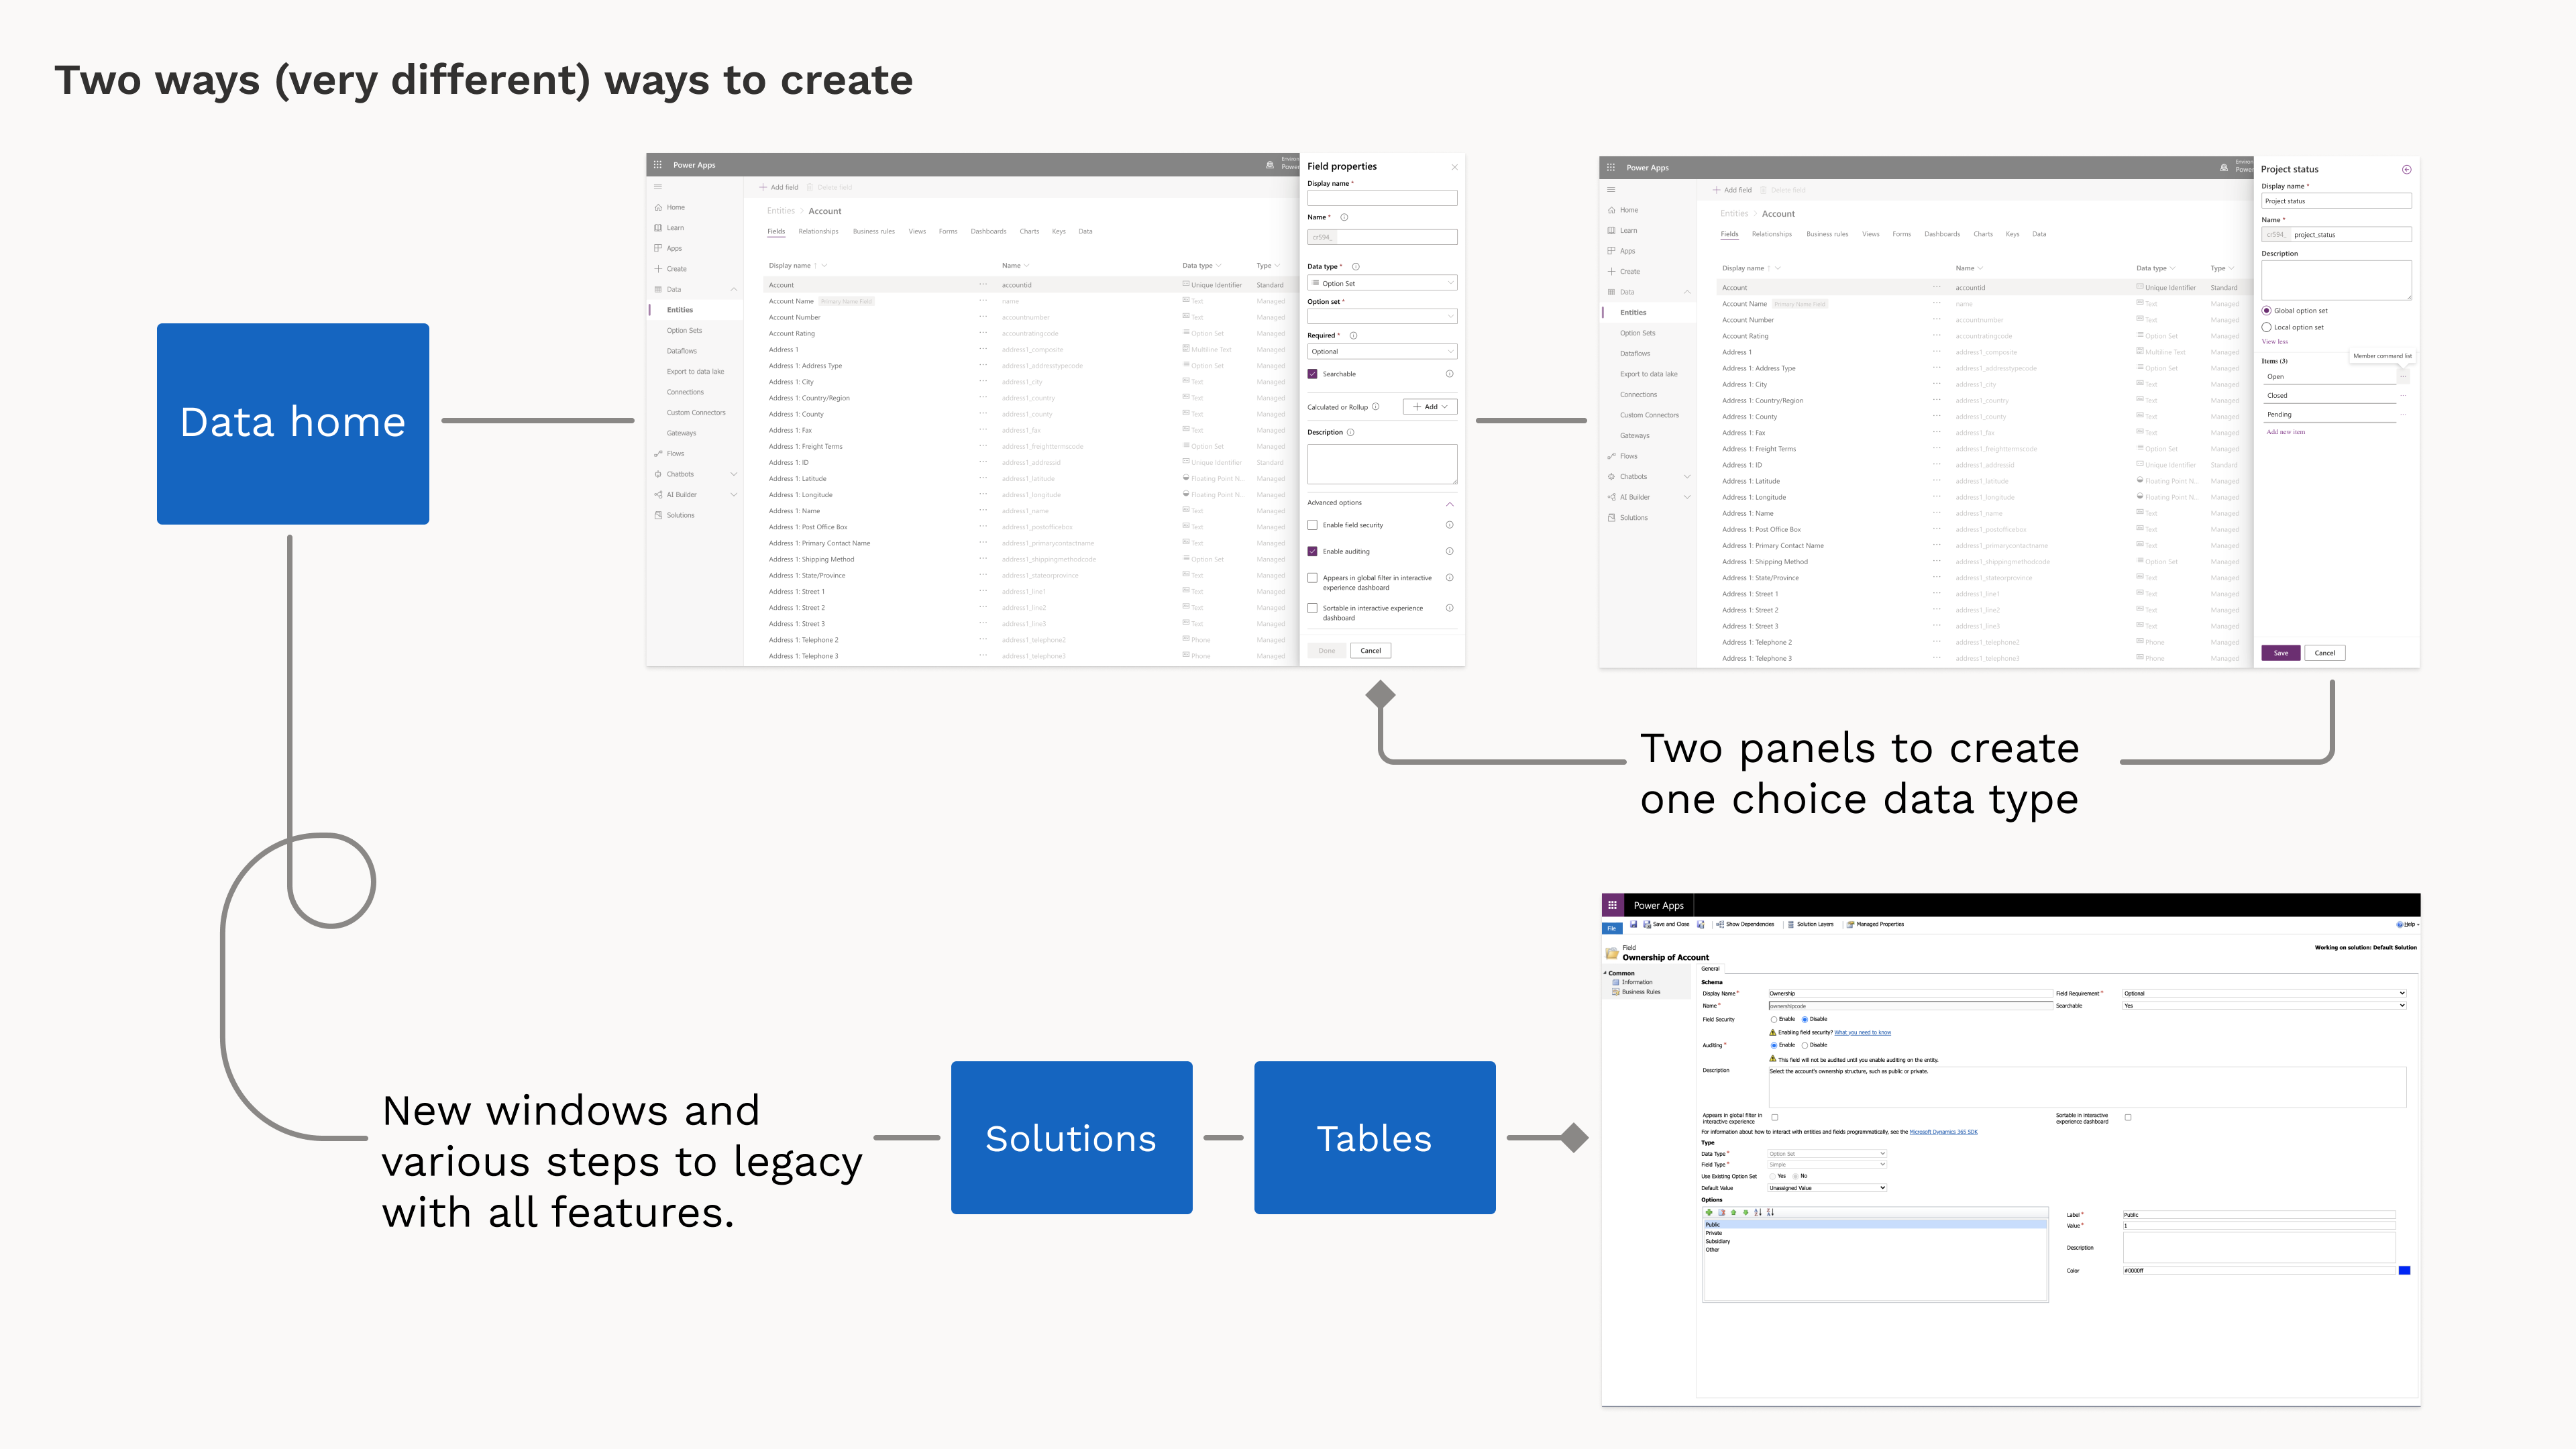 User flow showing branching legacy and current paths to create choice